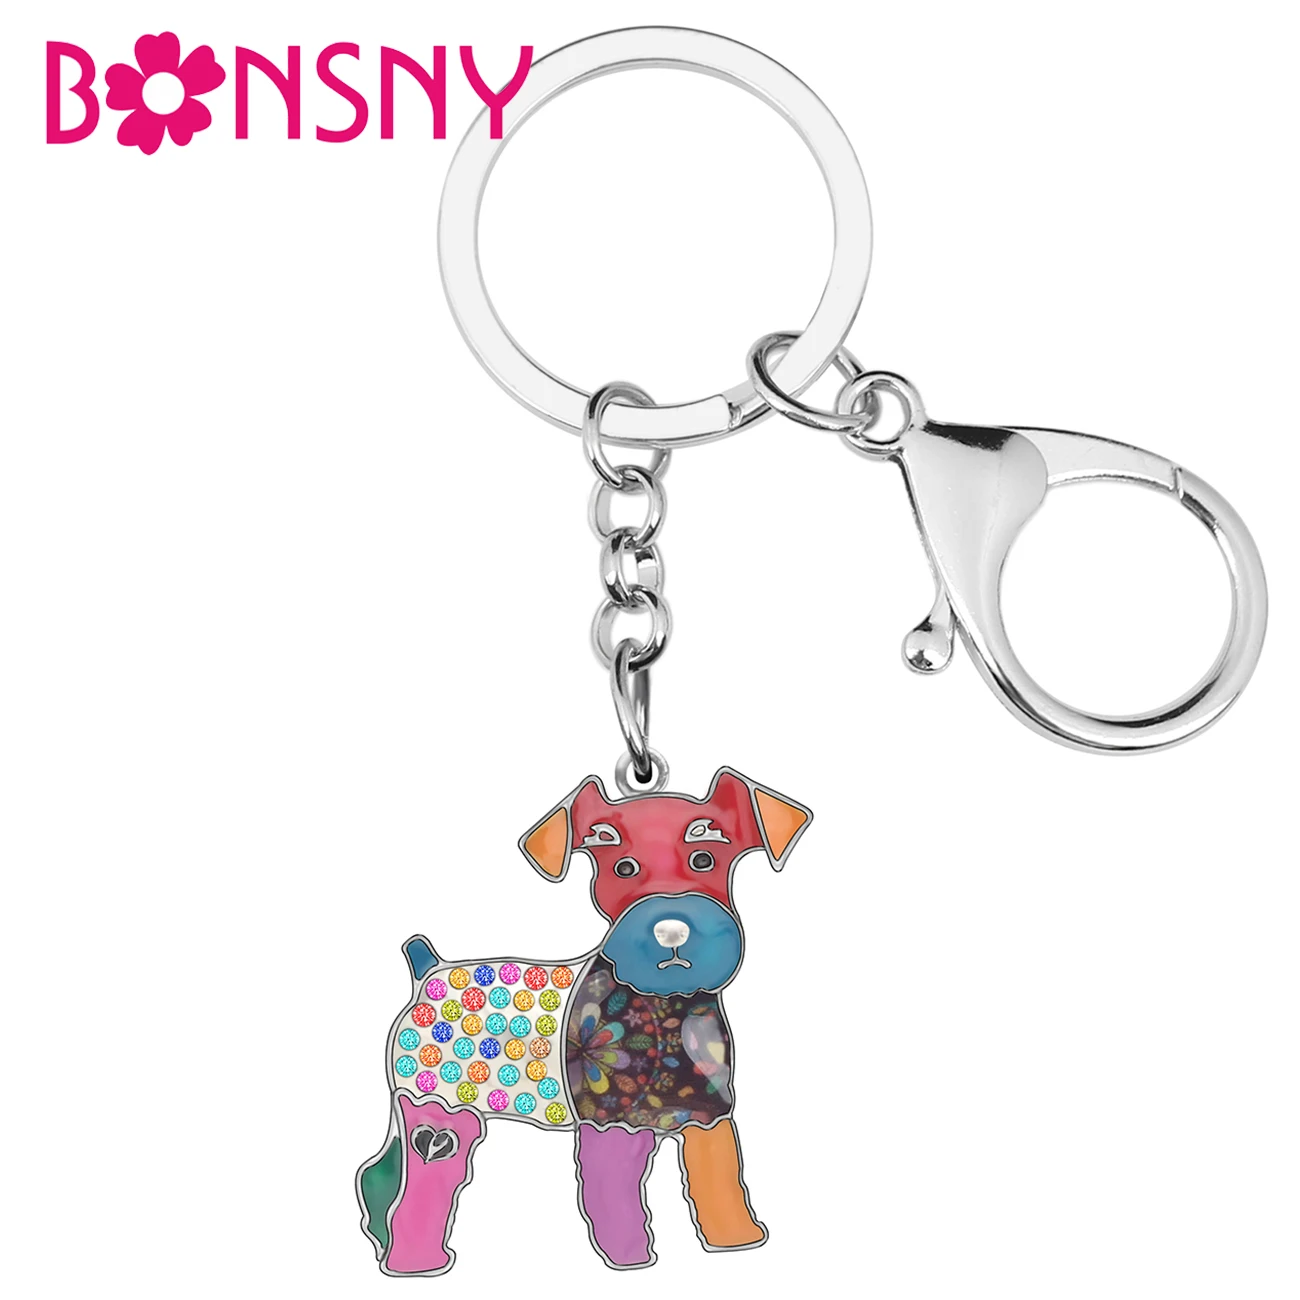 

Bonsny Enamel Standing Schnauzer Dog Key Chains Animal Pets Key Rings Jewelry For Women Girls Teens Pet Lovers Gift Accessories